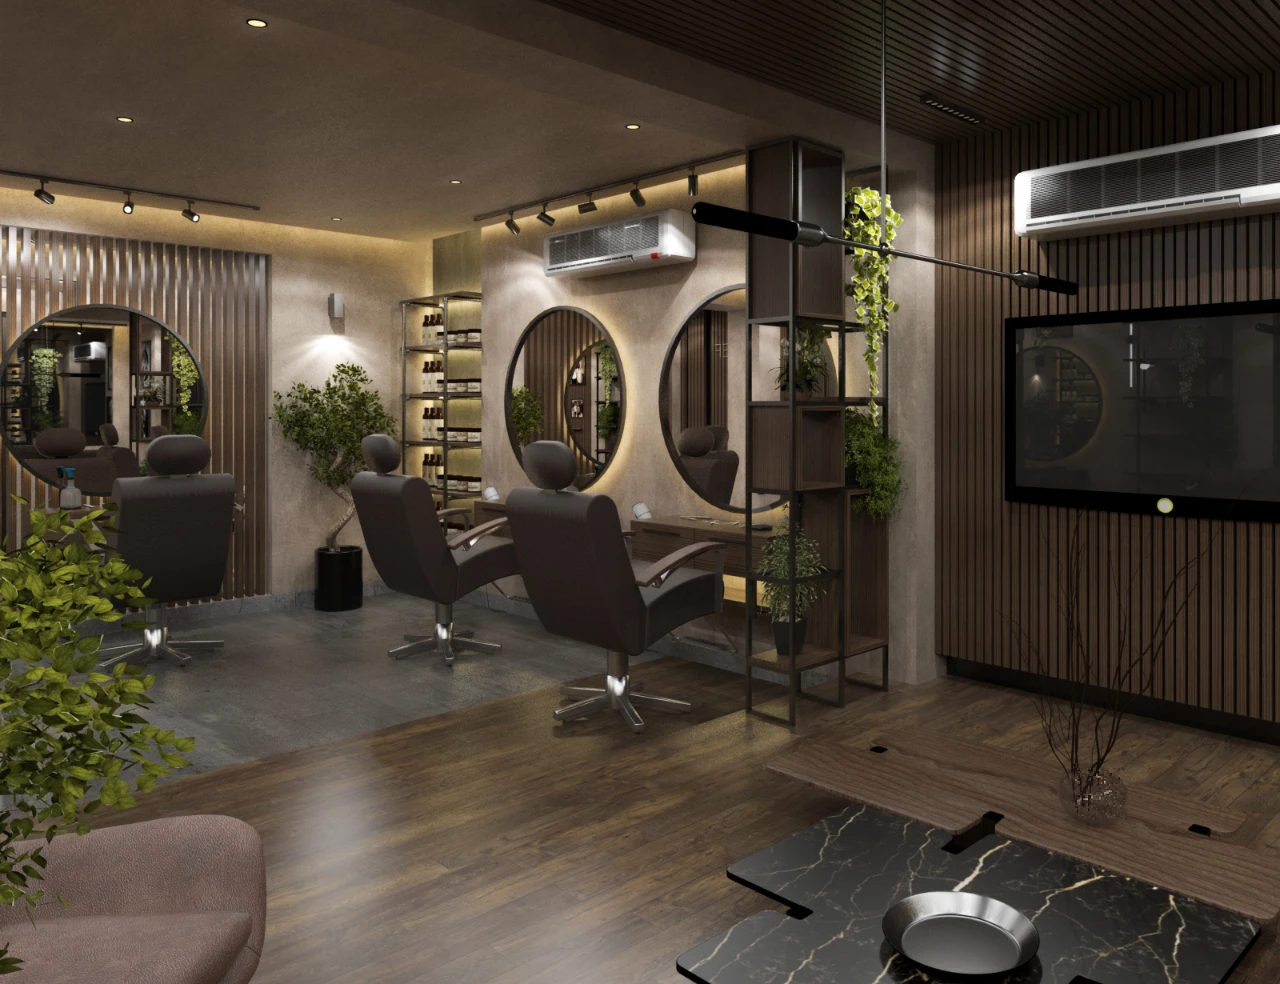 Atef Salon Interior Design and Fit out